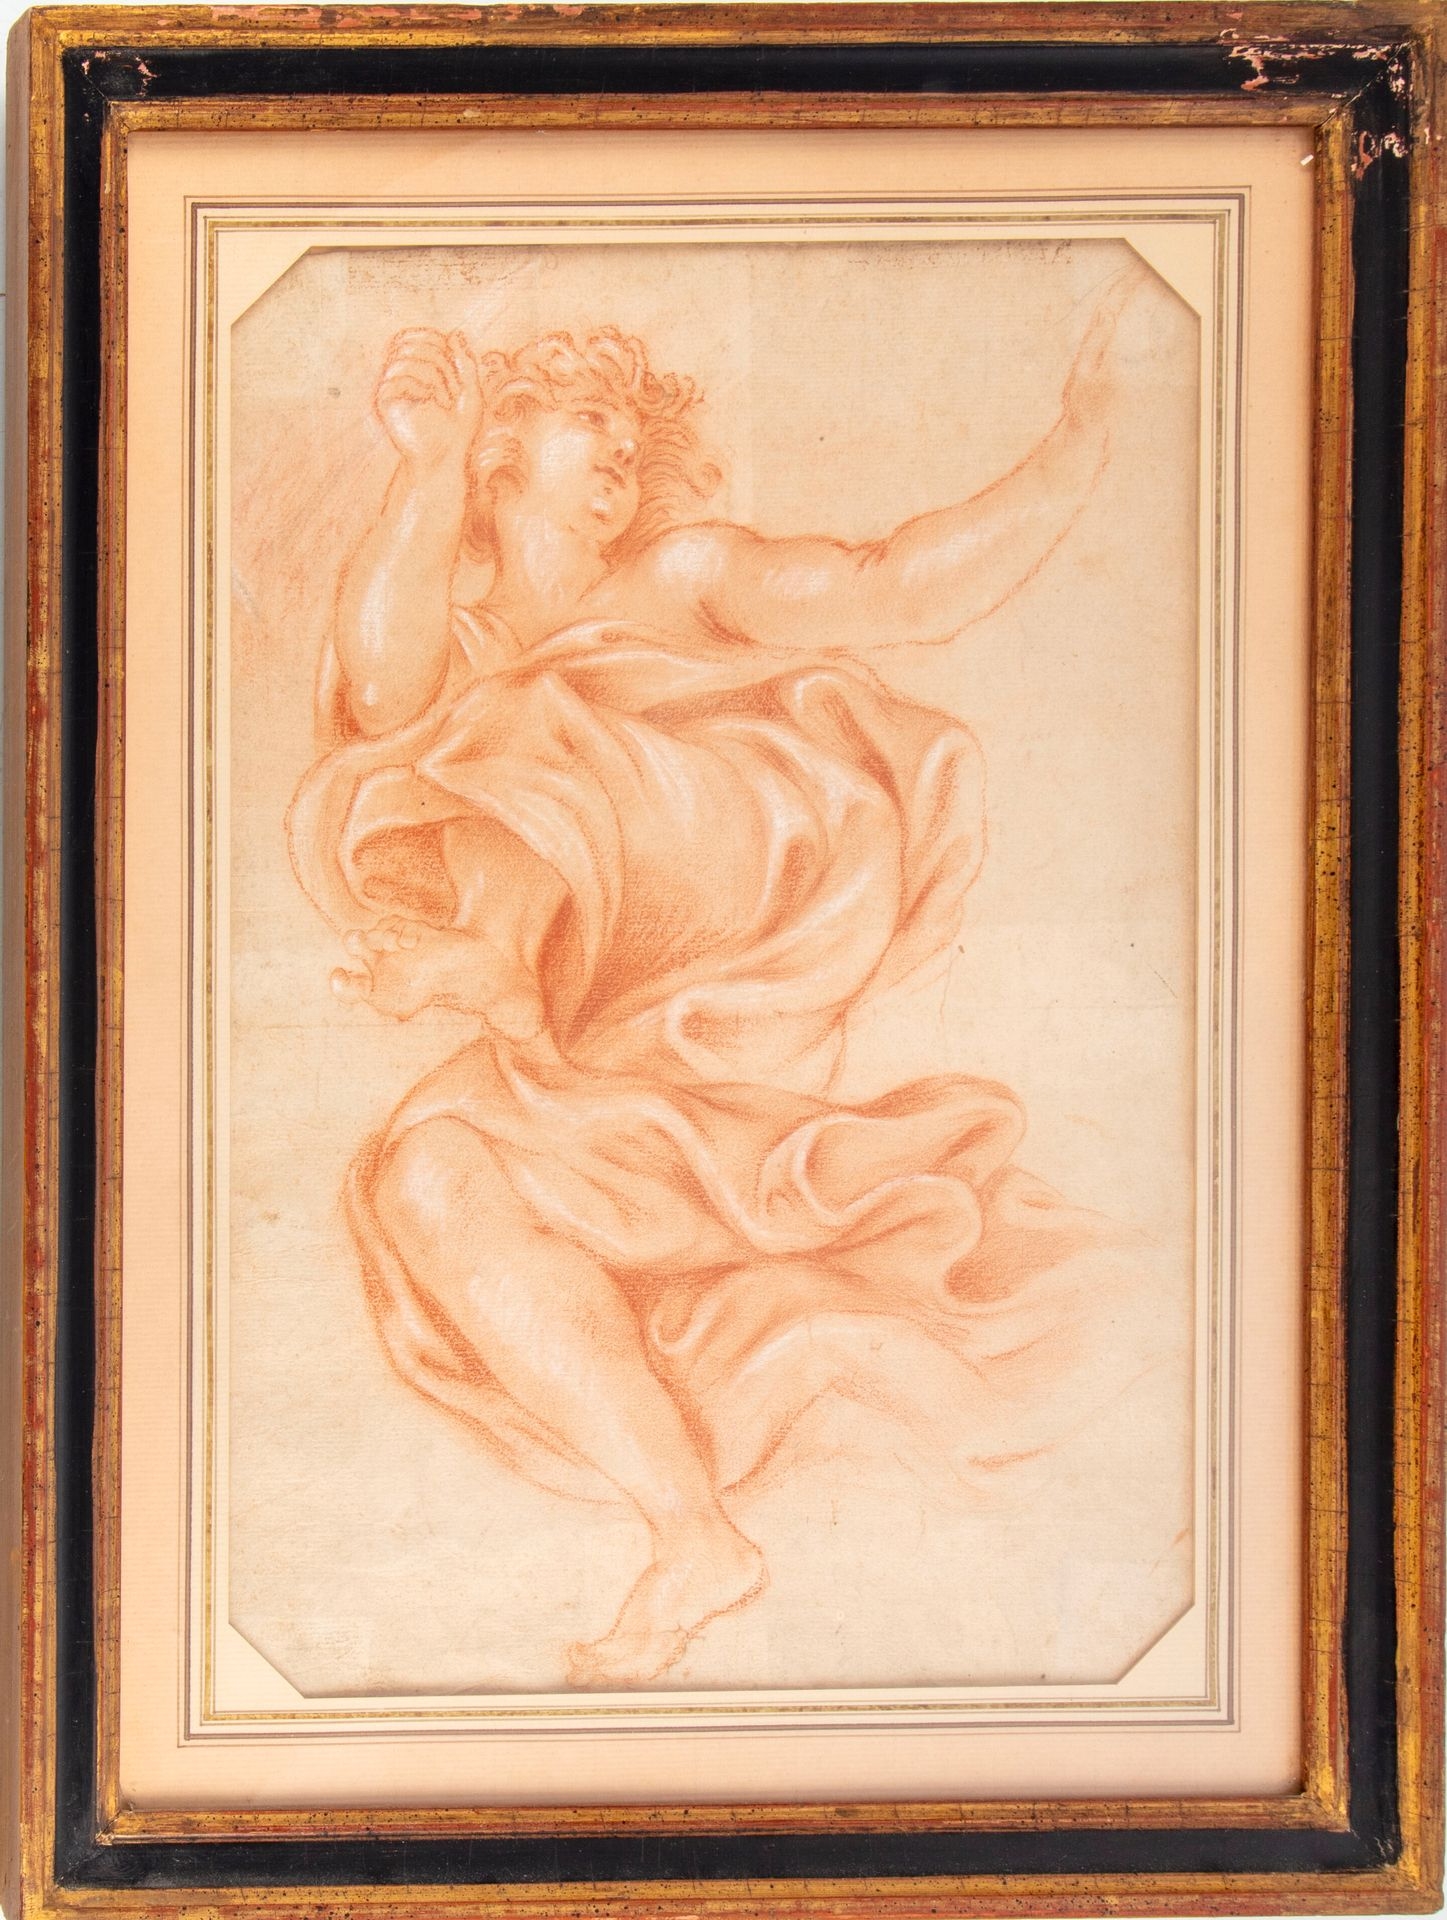 Angel with drape by French School, 18th Century